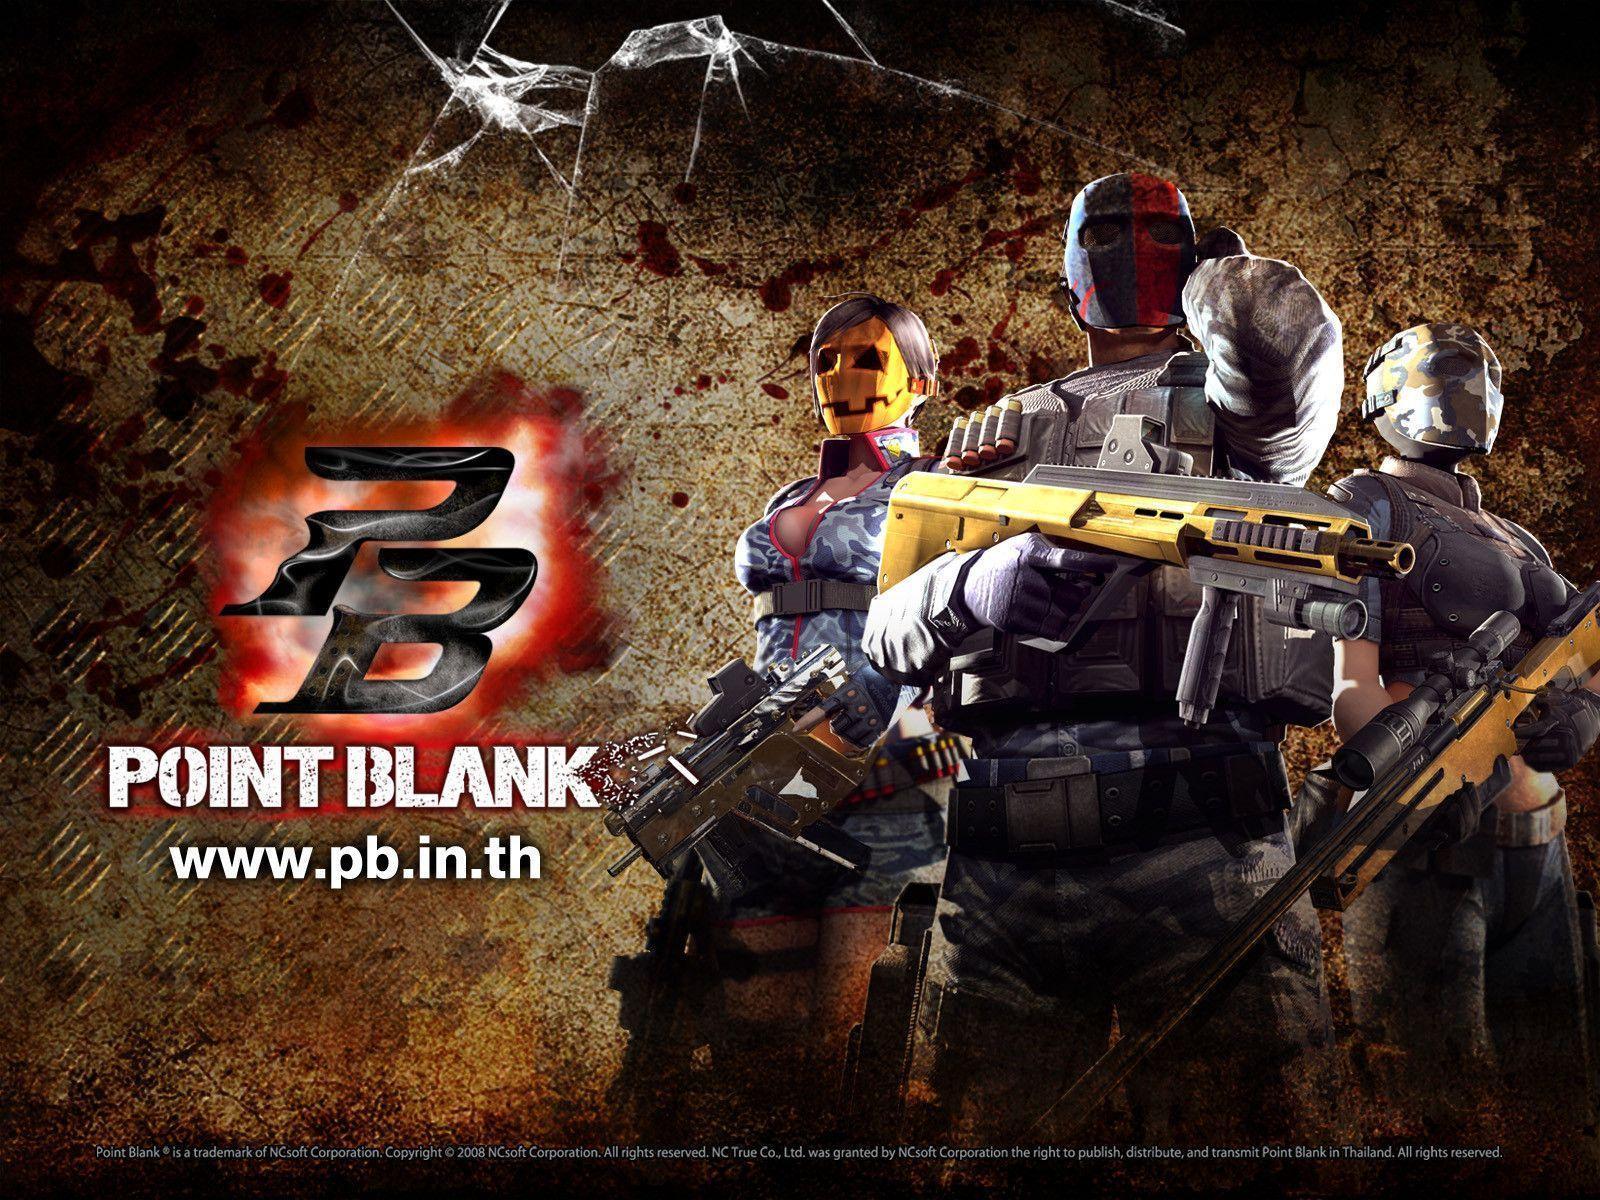 Point Blank Wallpapers 2015 Wallpaper Cave